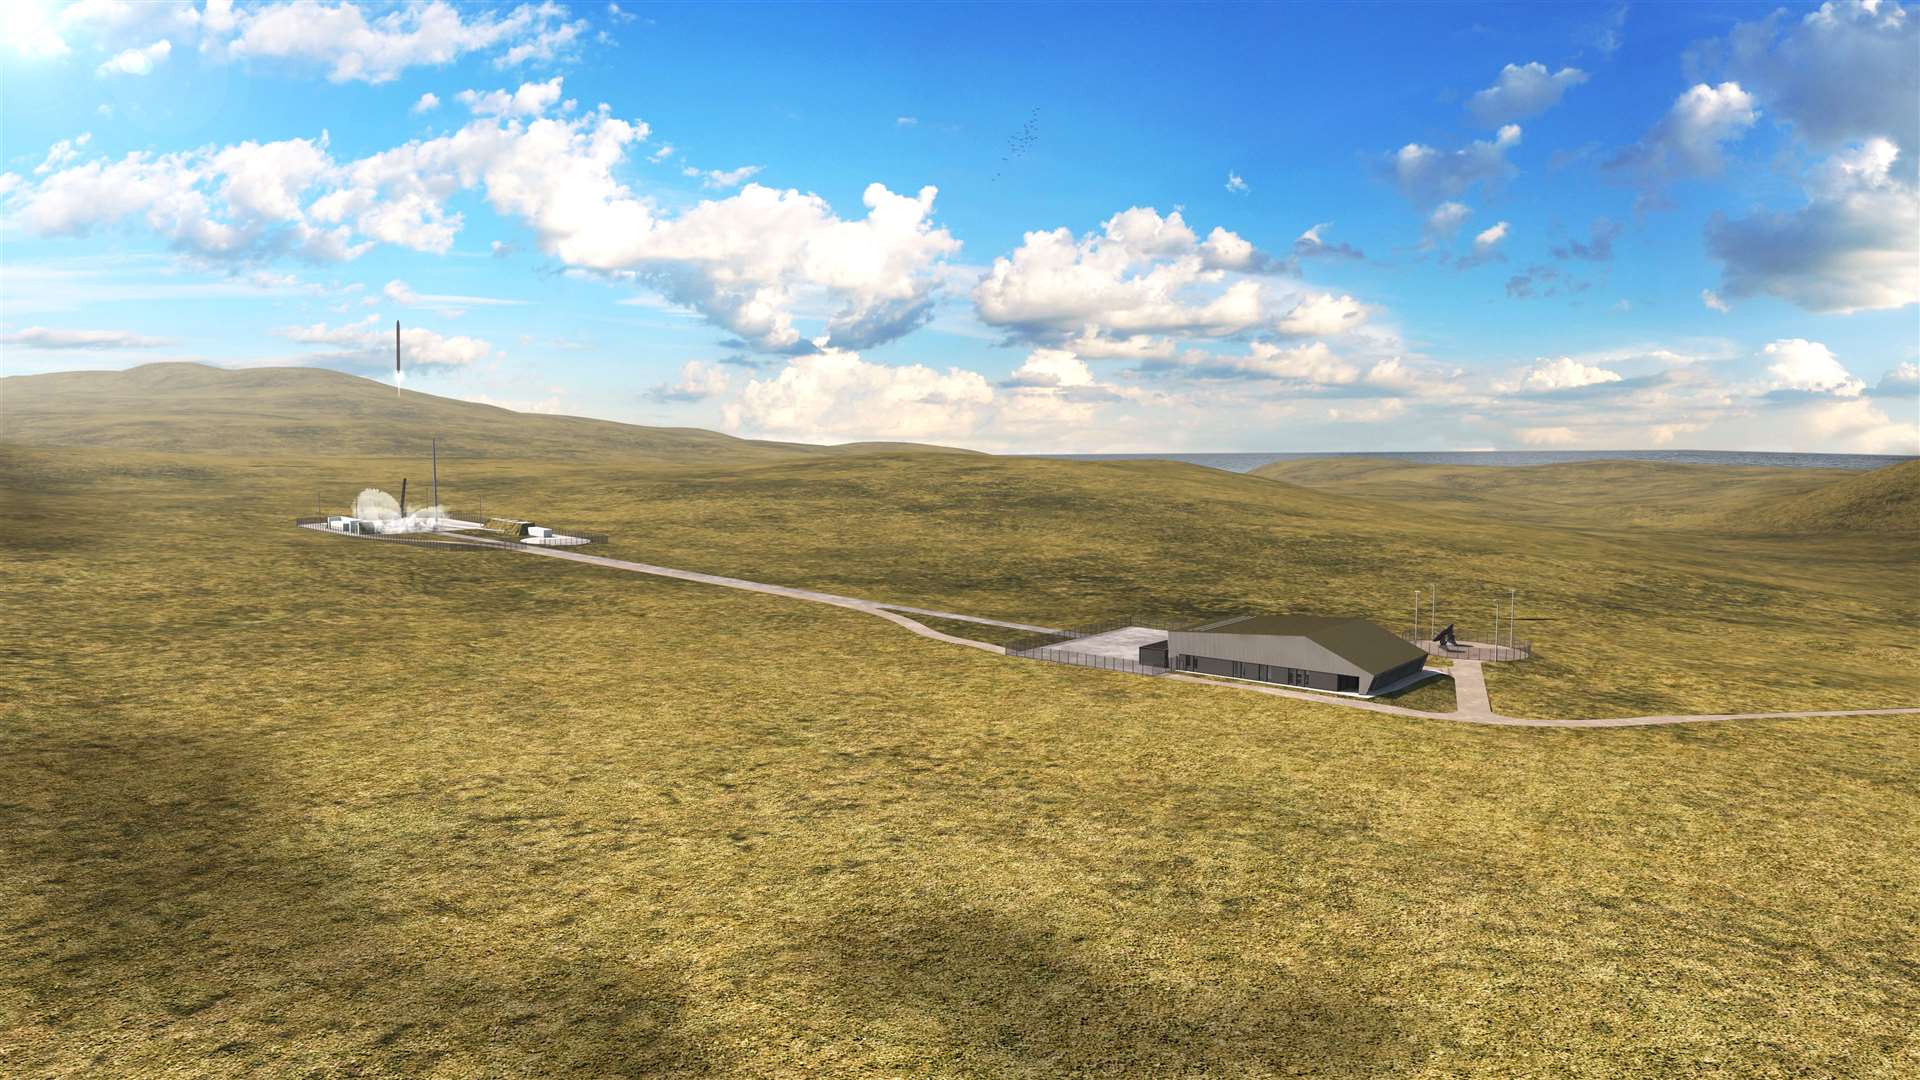 Space Hub Sutherland - artist impression of launch pad and integration facility.